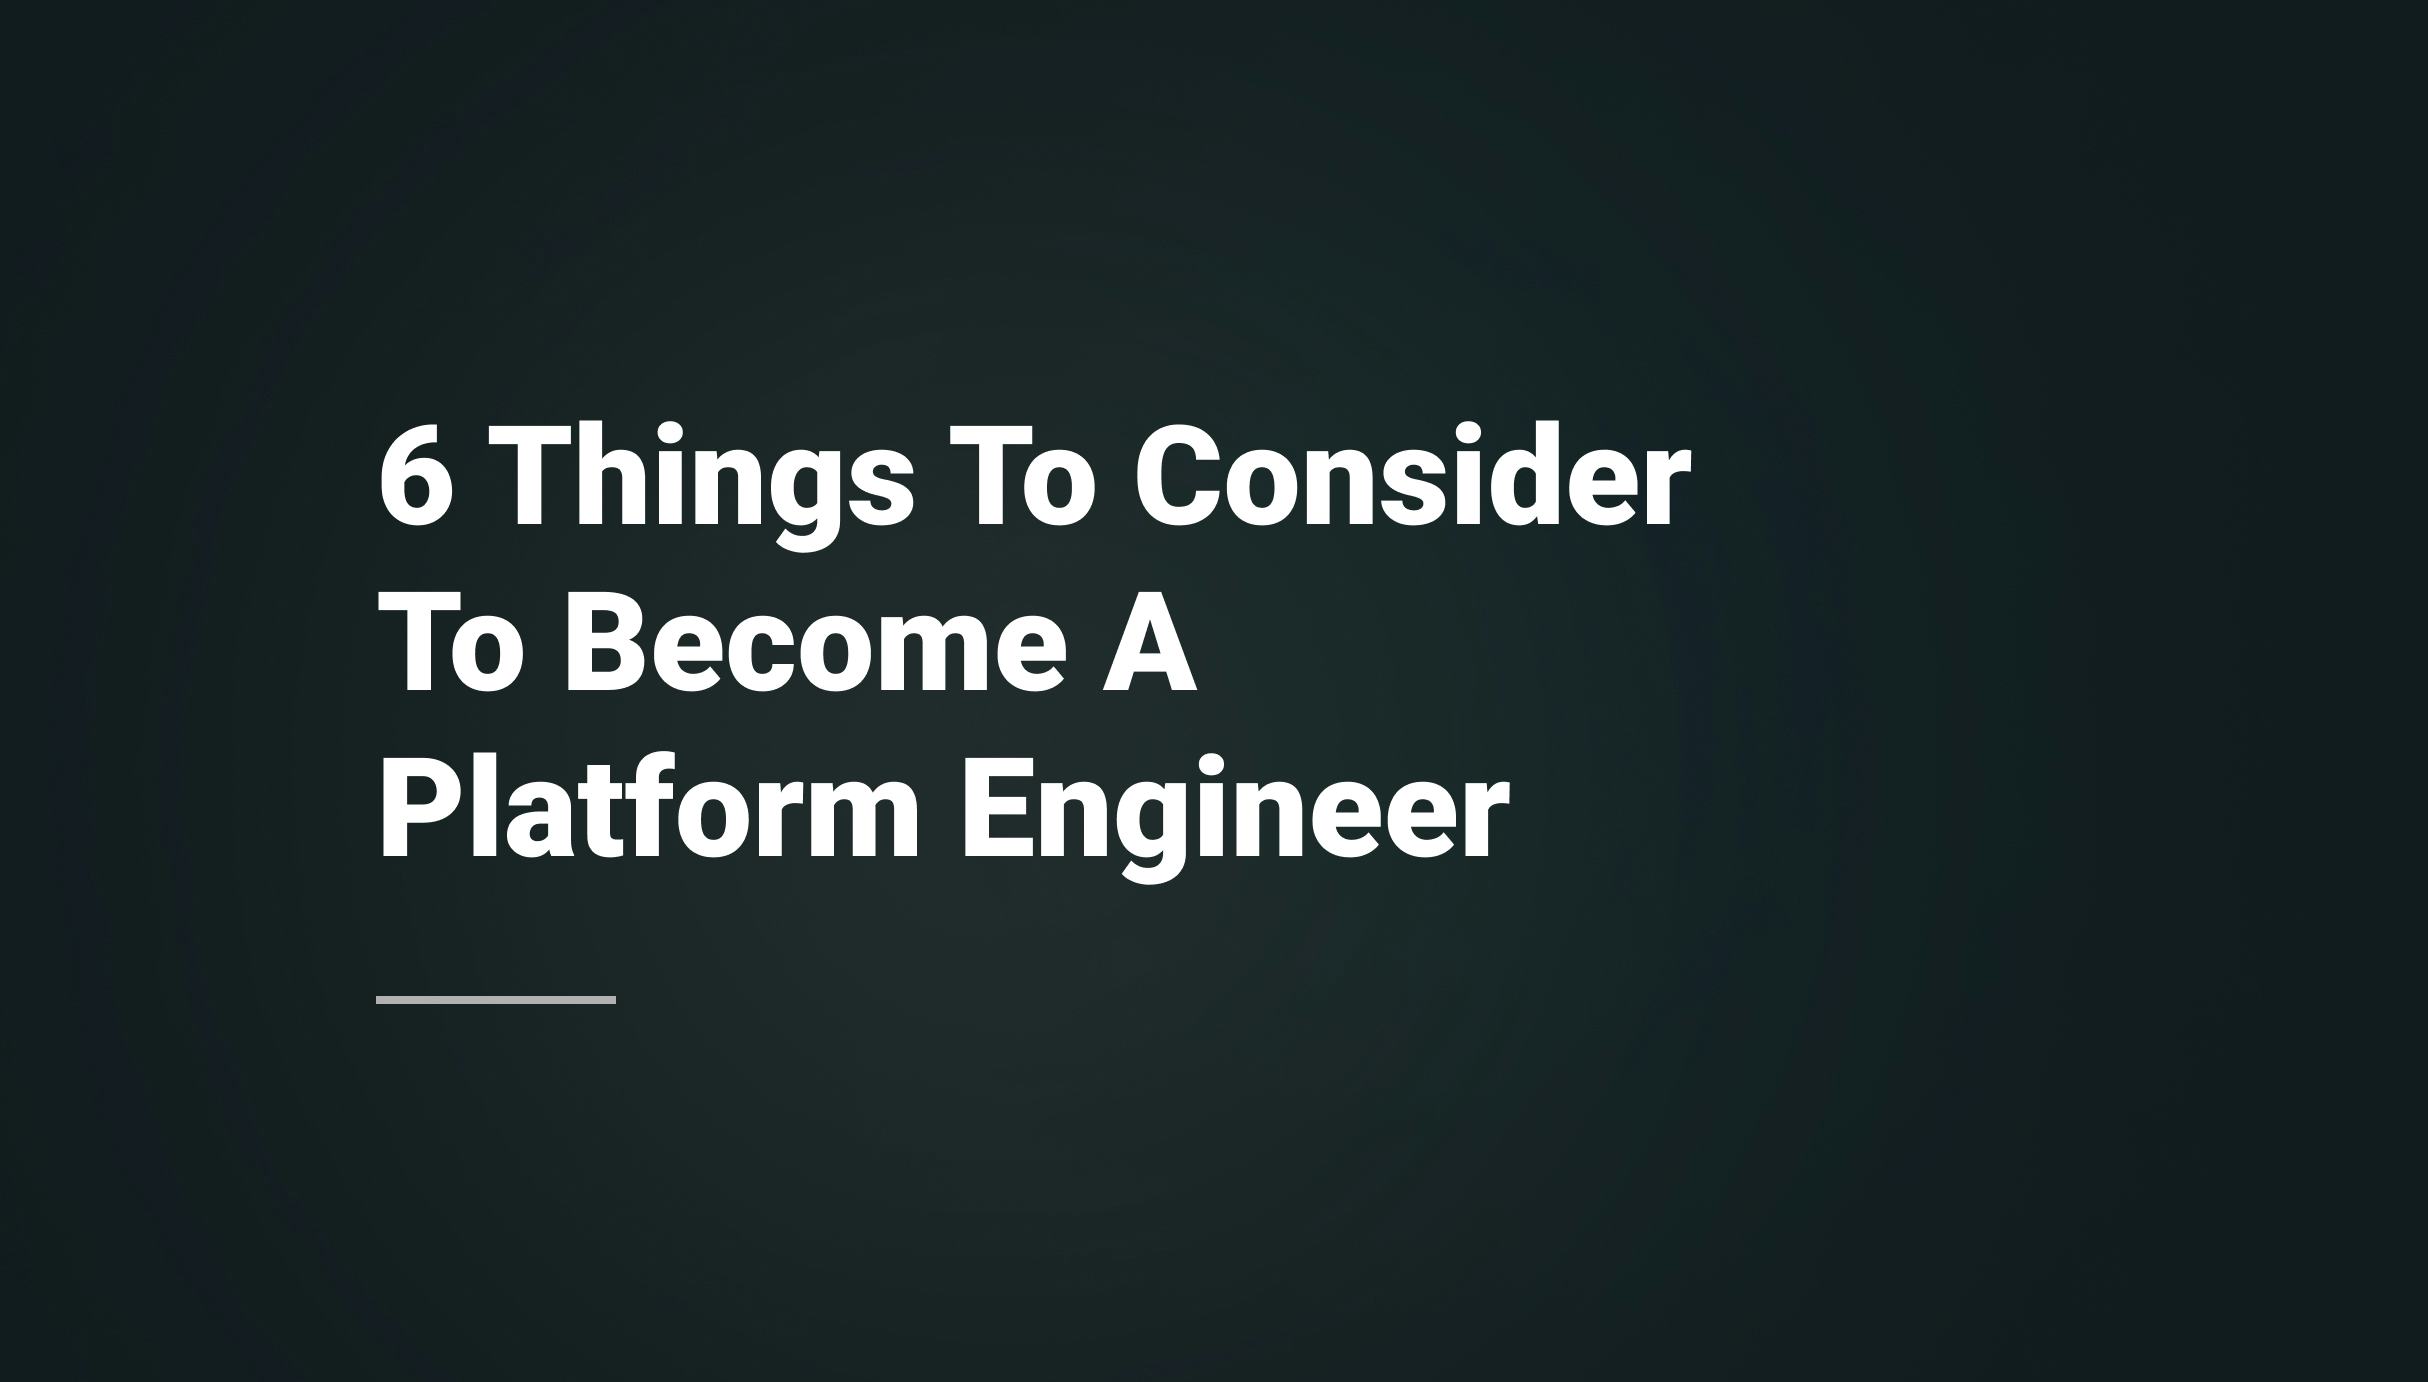 From DevOps to Platform Engineer: 6 Things You Should Consider - Qovery